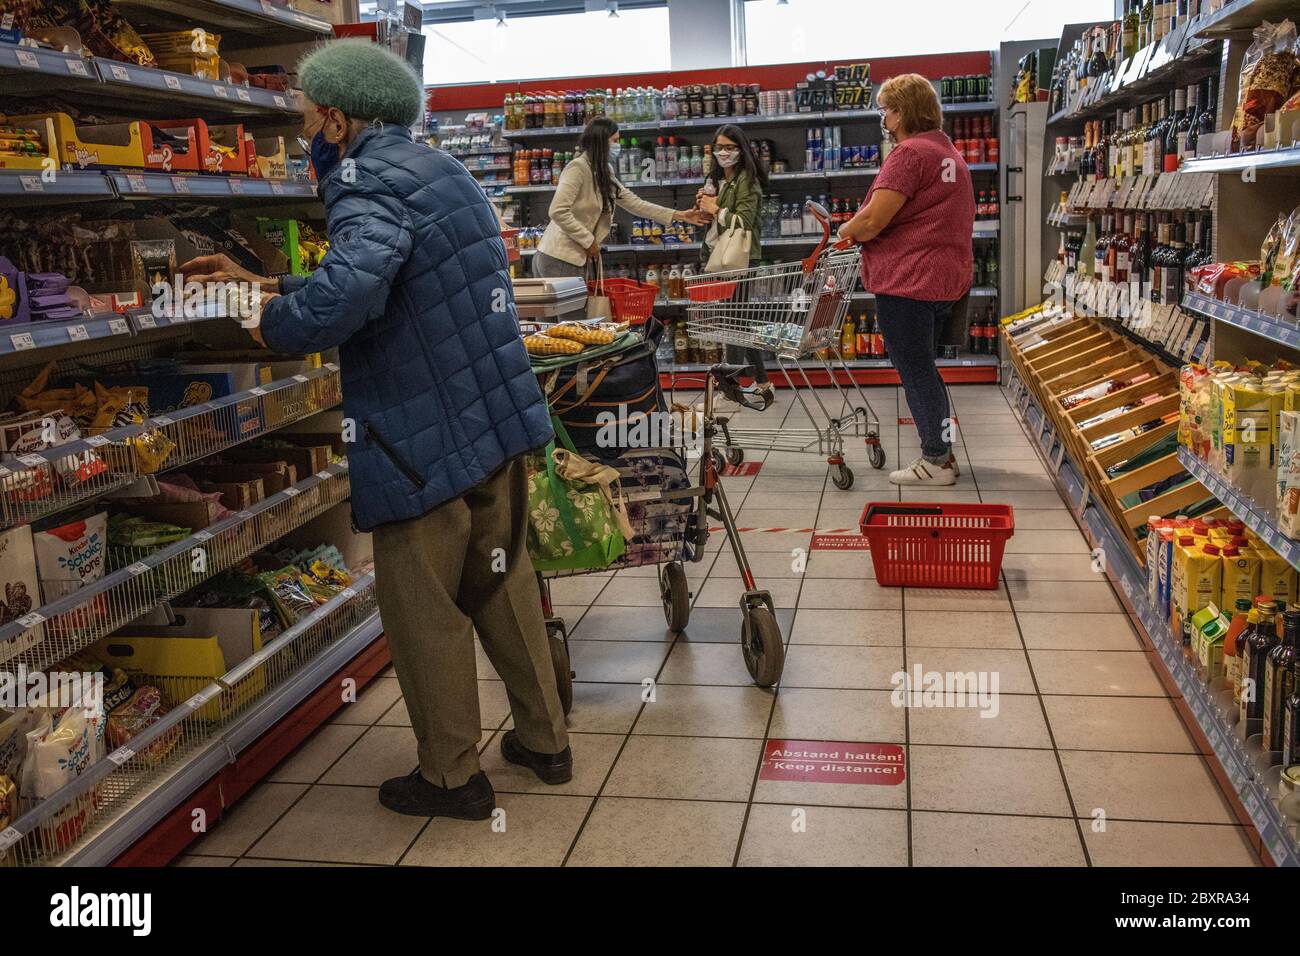 Shoppers in a local supermarket in Braunschweig wearing mandatory face masks after the coronavirus lockdown was lifted, north-central Germany, Europe Stock Photo